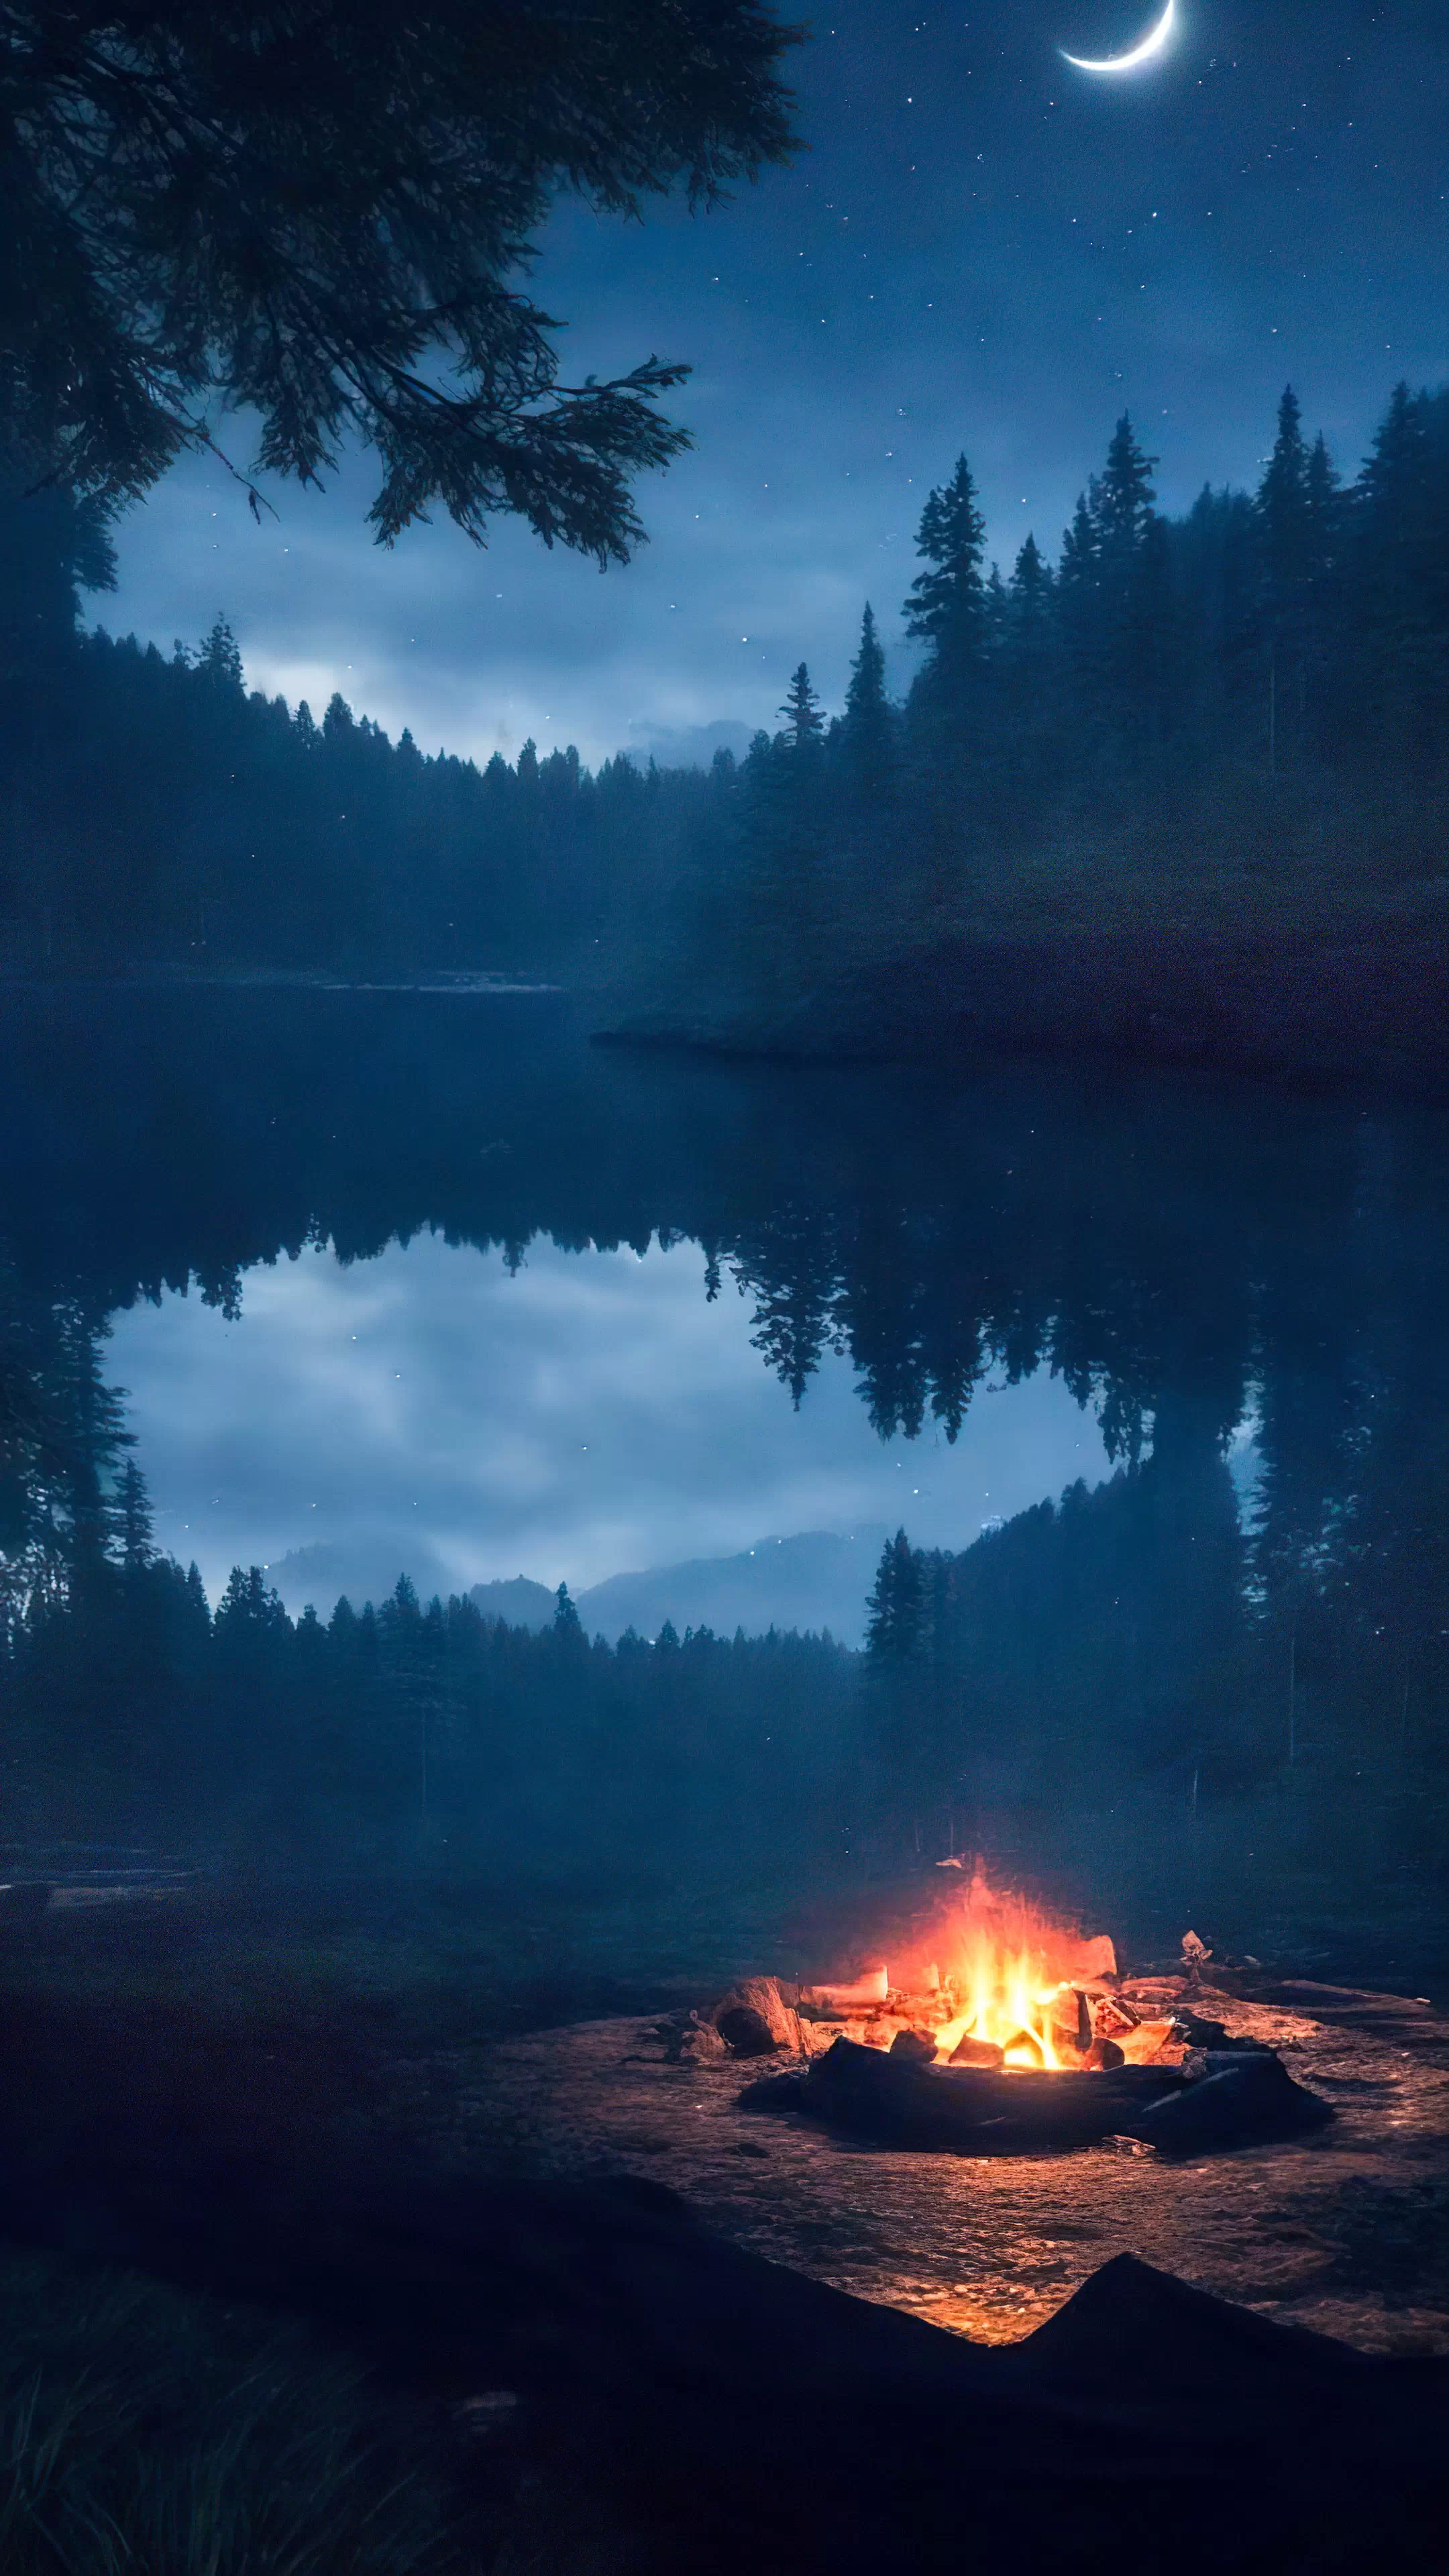 Get a taste of adventure with our HD nature wallpaper, featuring a campsite with a warm campfire in the heart of a dark wilderness, and let your screen transport you to a night under the stars.